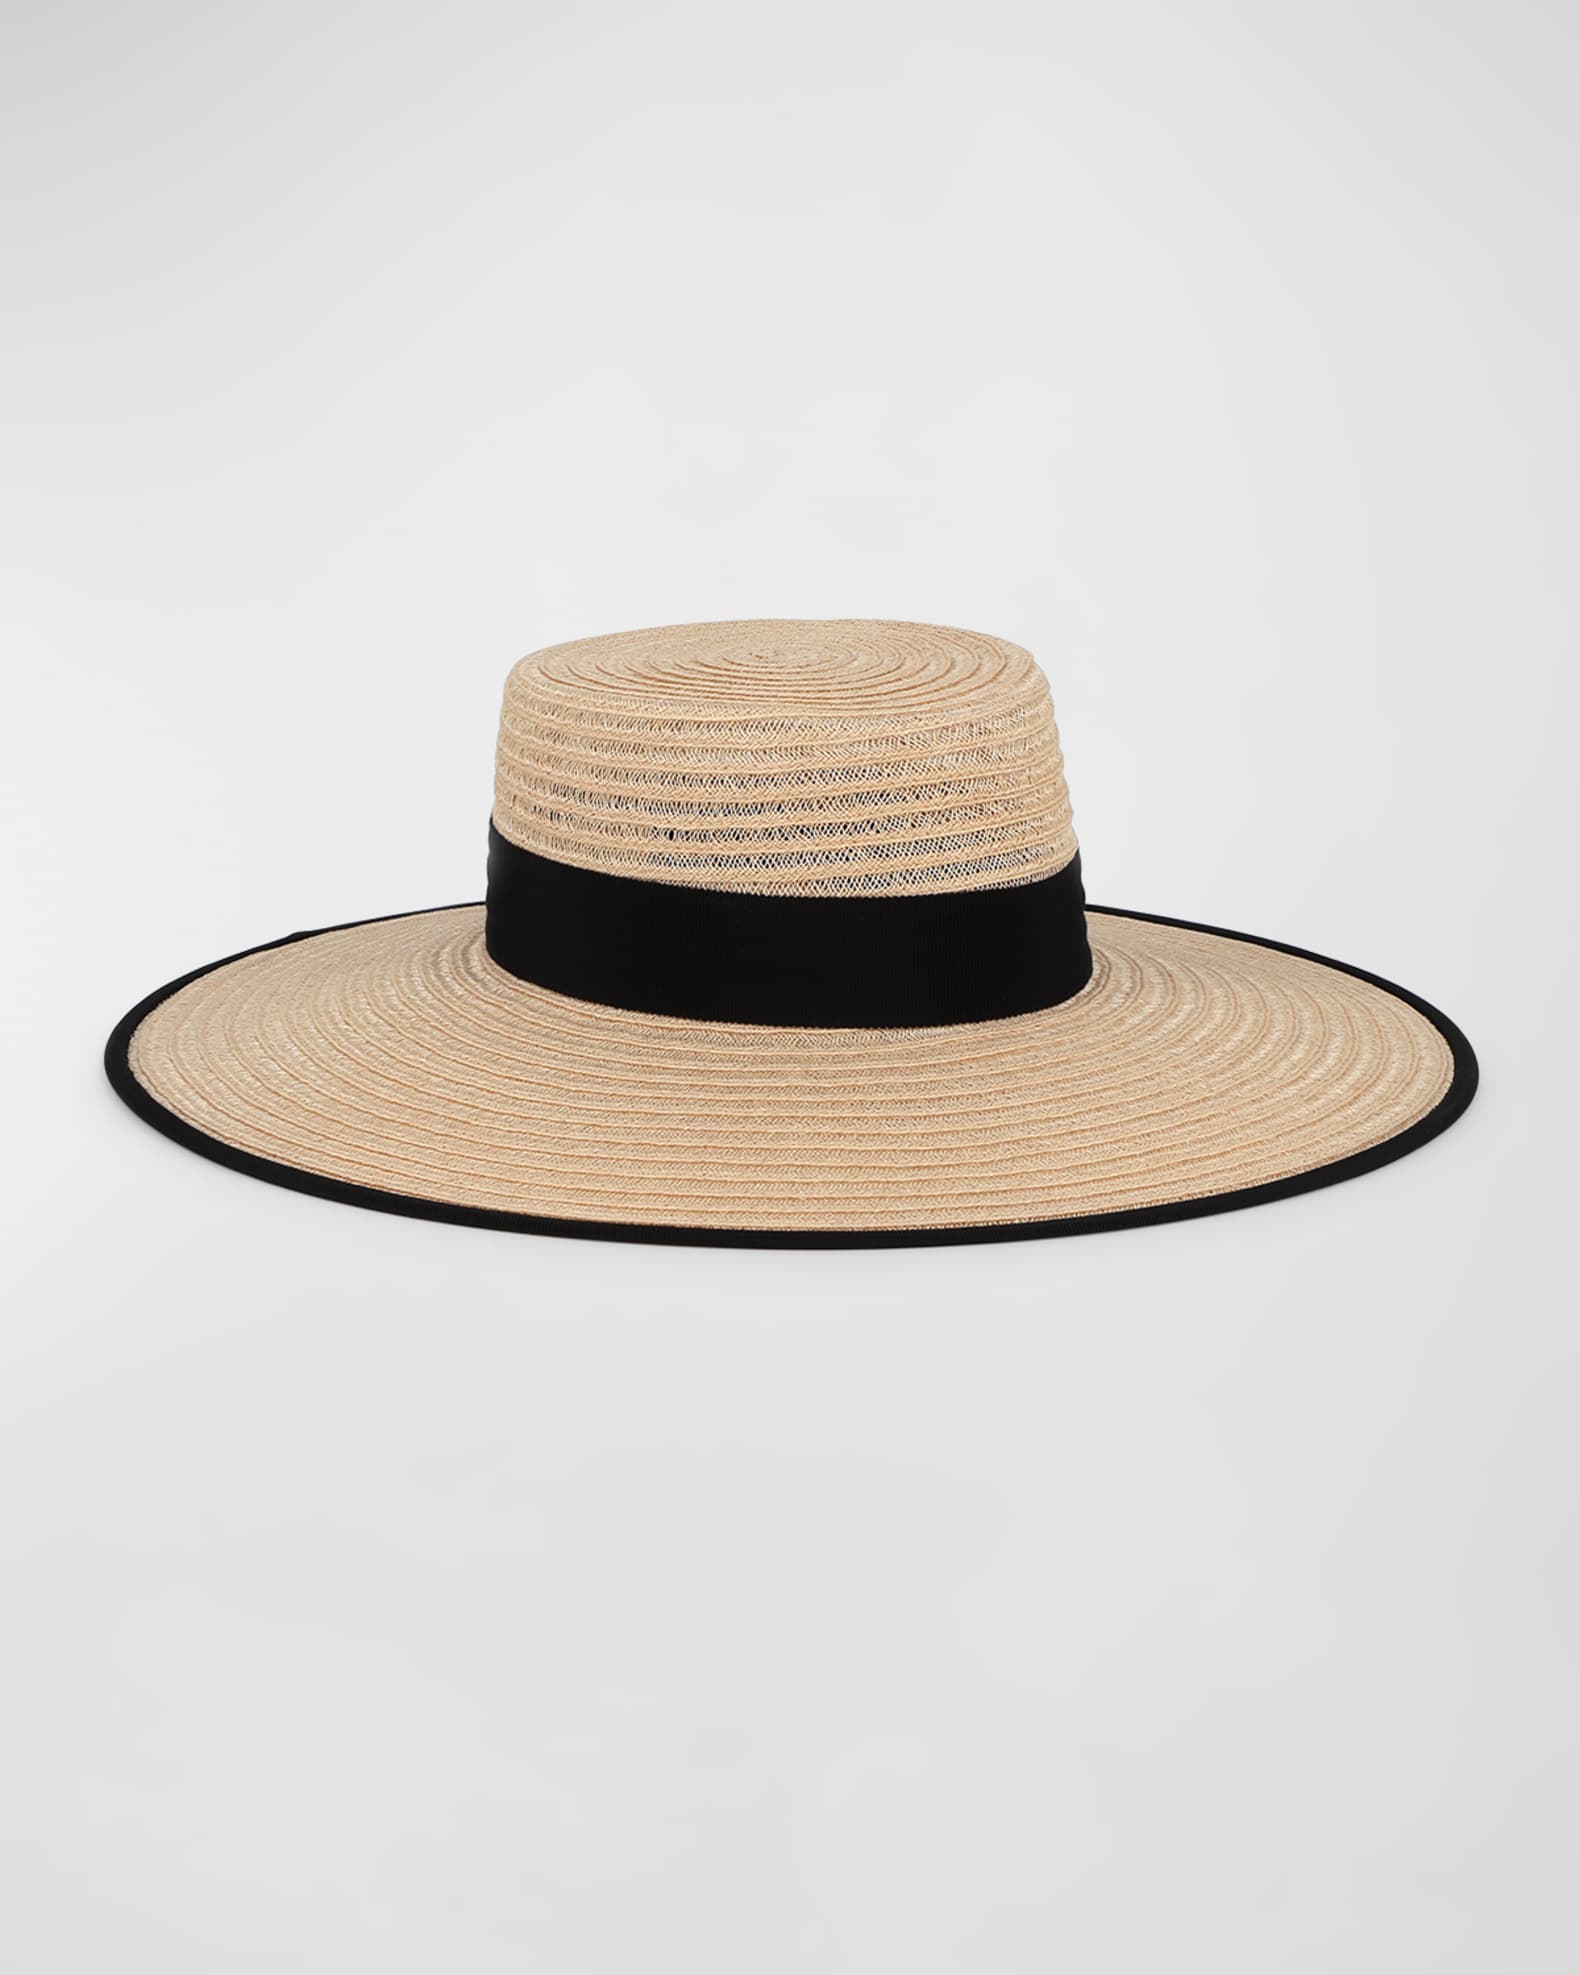 Christian Dior Womens Wide-brimmed Hats